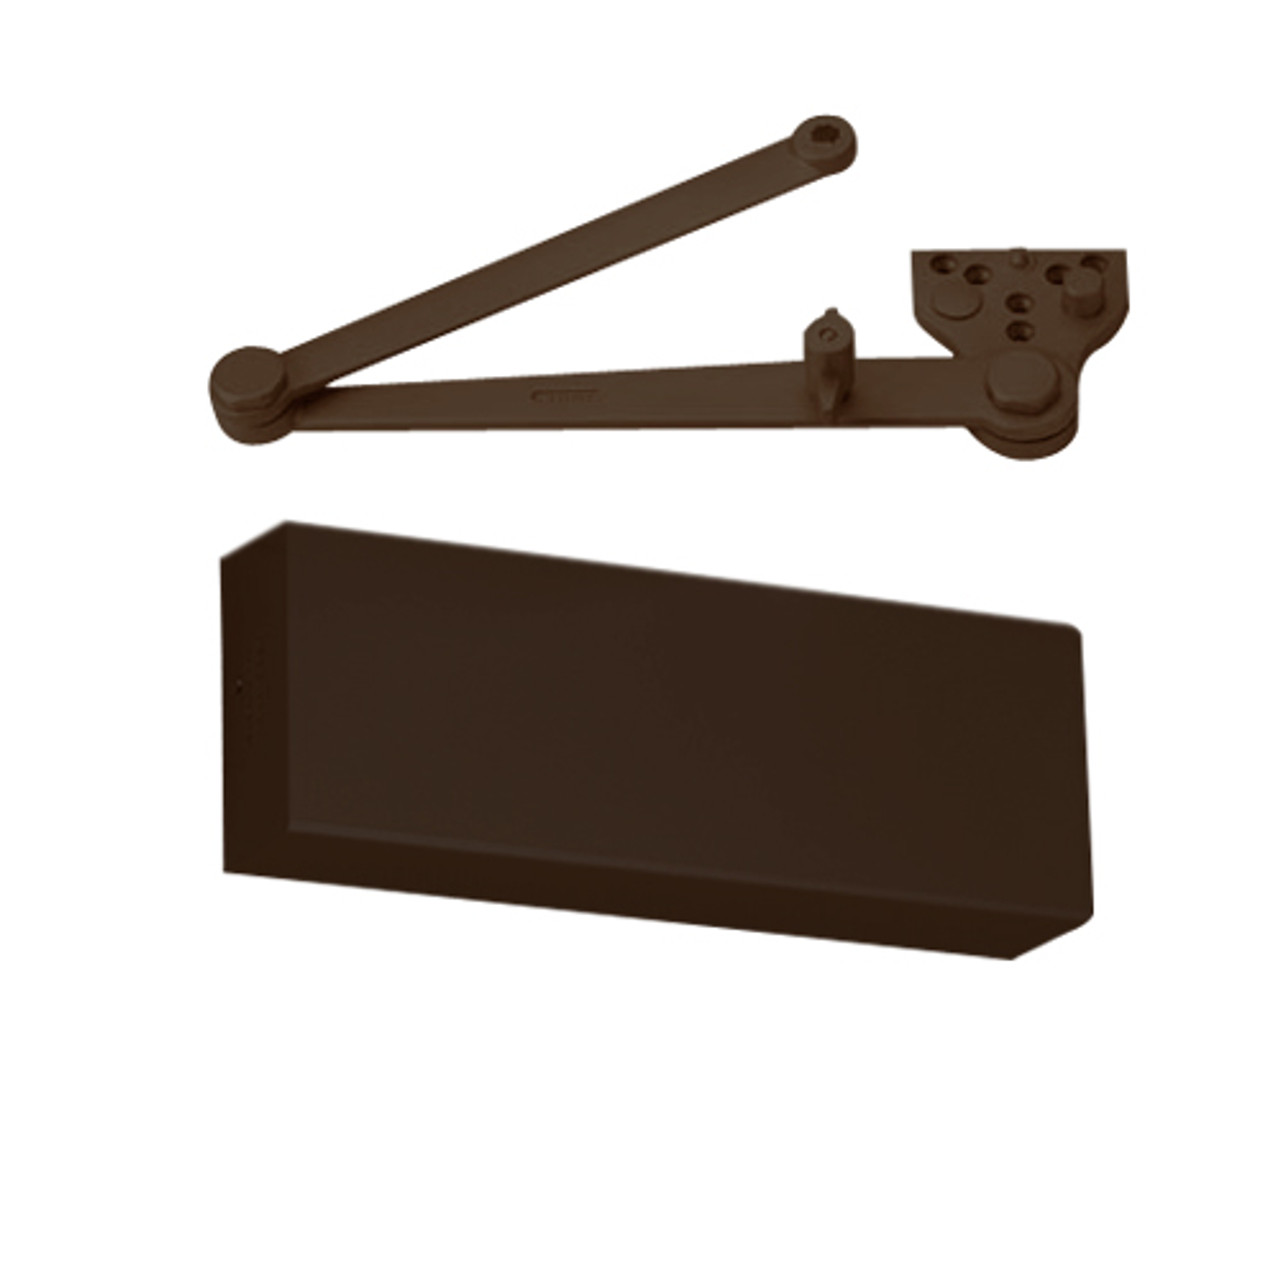 CLP9500T-690 Norton 9500 Series Hold Open Cast Iron Door Closer with CloserPlus Arm in Statuary Bronze Finish